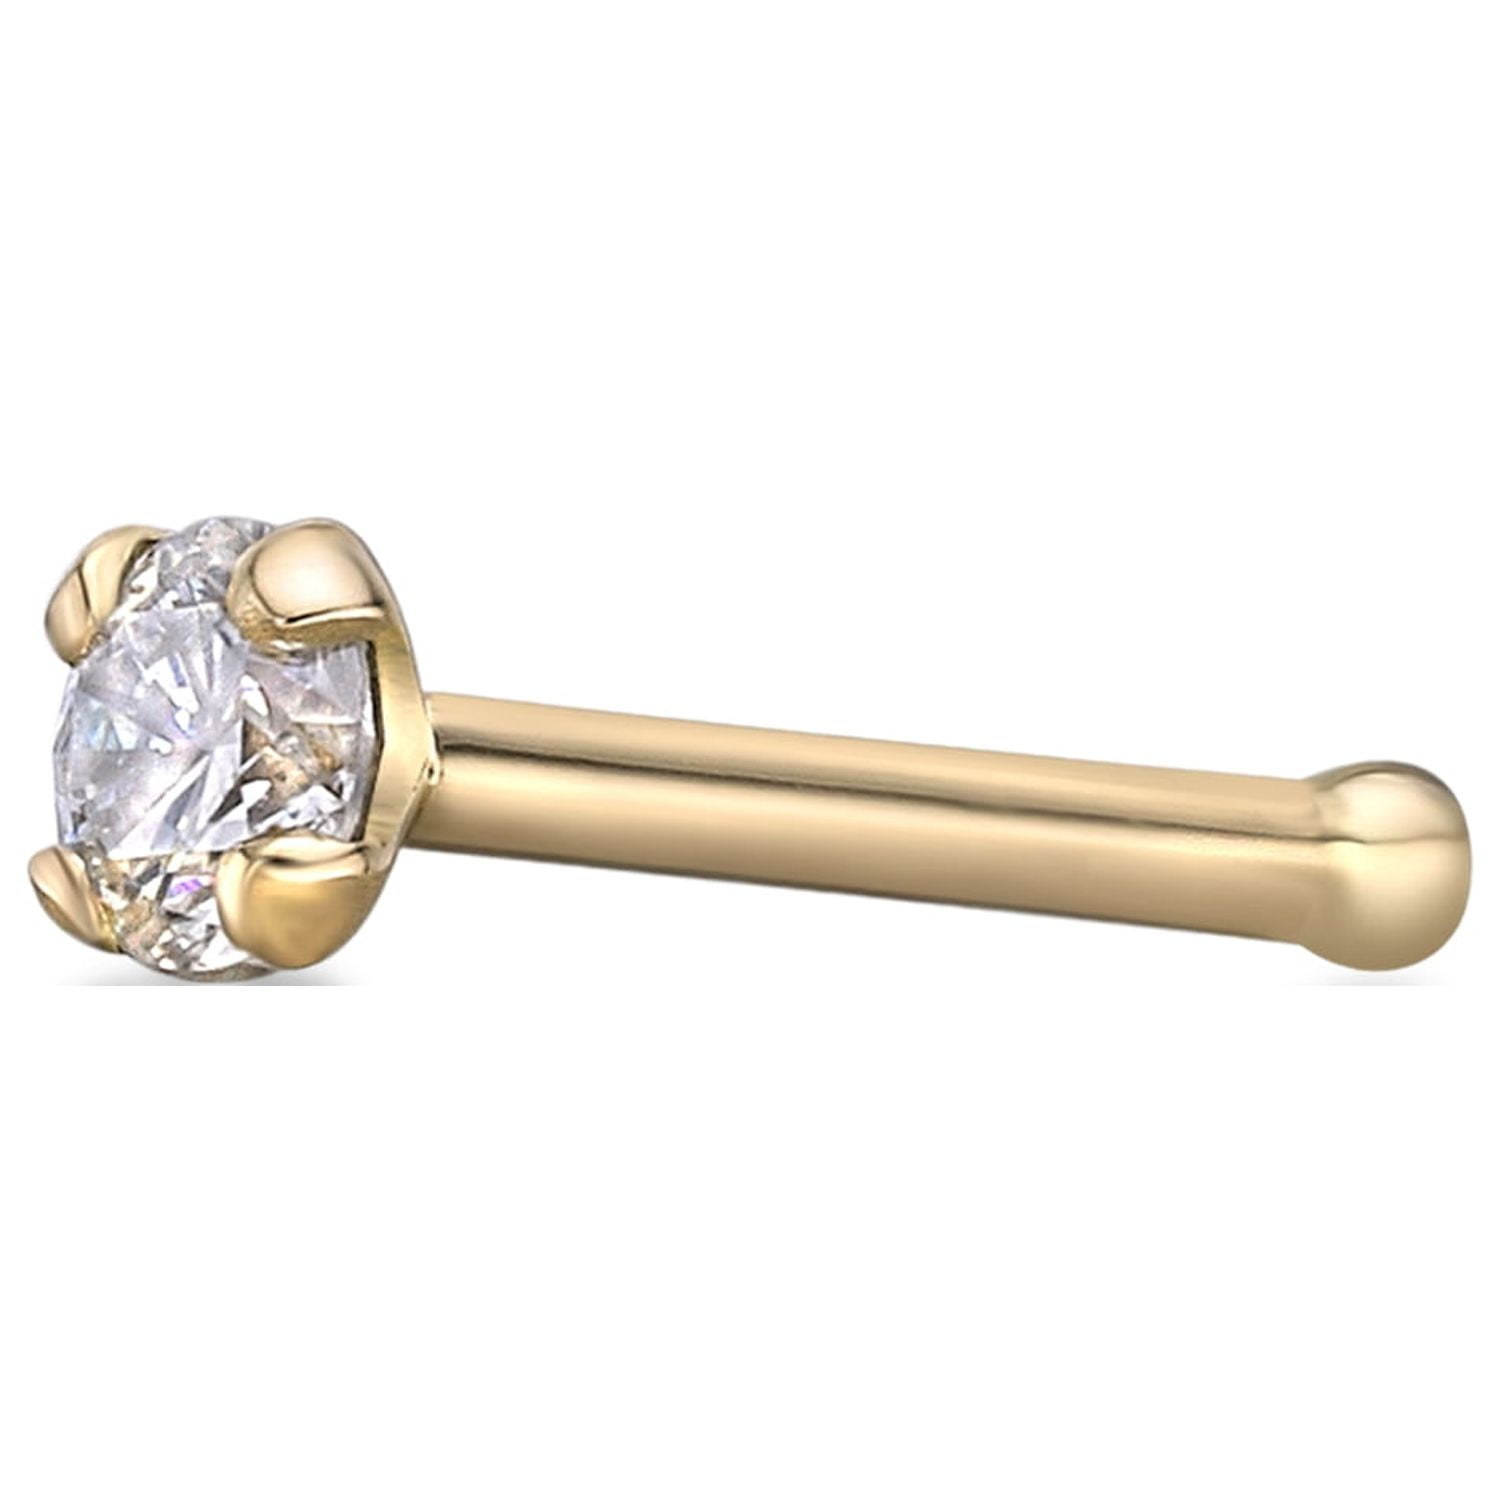 Diamond Nose Stud / Nose Pin 18ct White / Yellow Gold 0.02 Carats 4-claw  1.7 Mm - Etsy